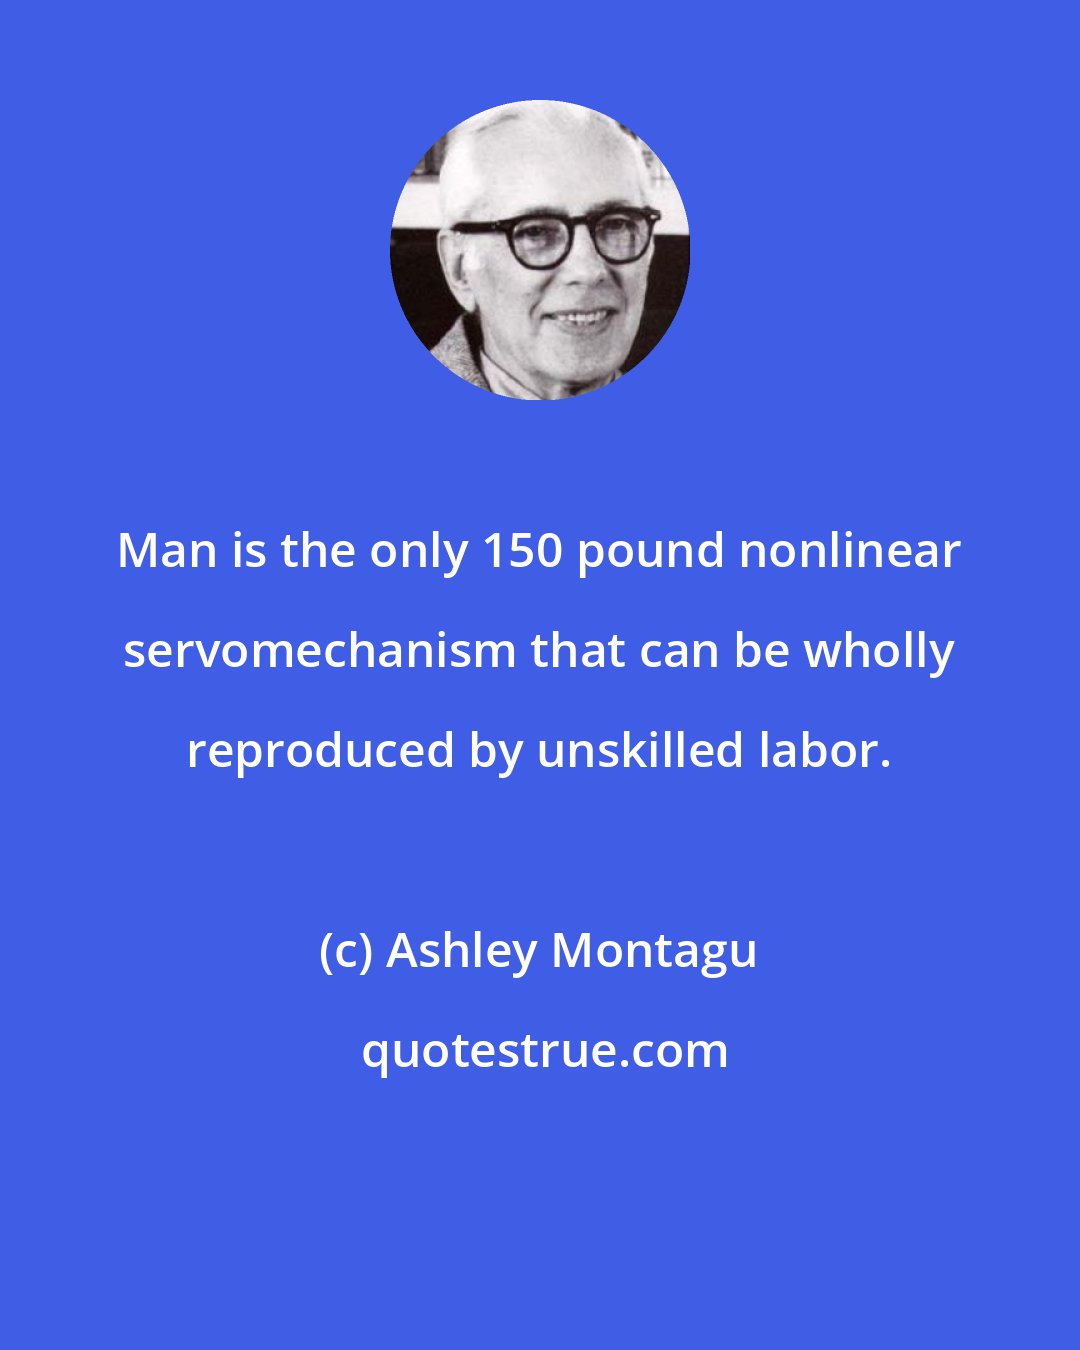 Ashley Montagu: Man is the only 150 pound nonlinear servomechanism that can be wholly reproduced by unskilled labor.